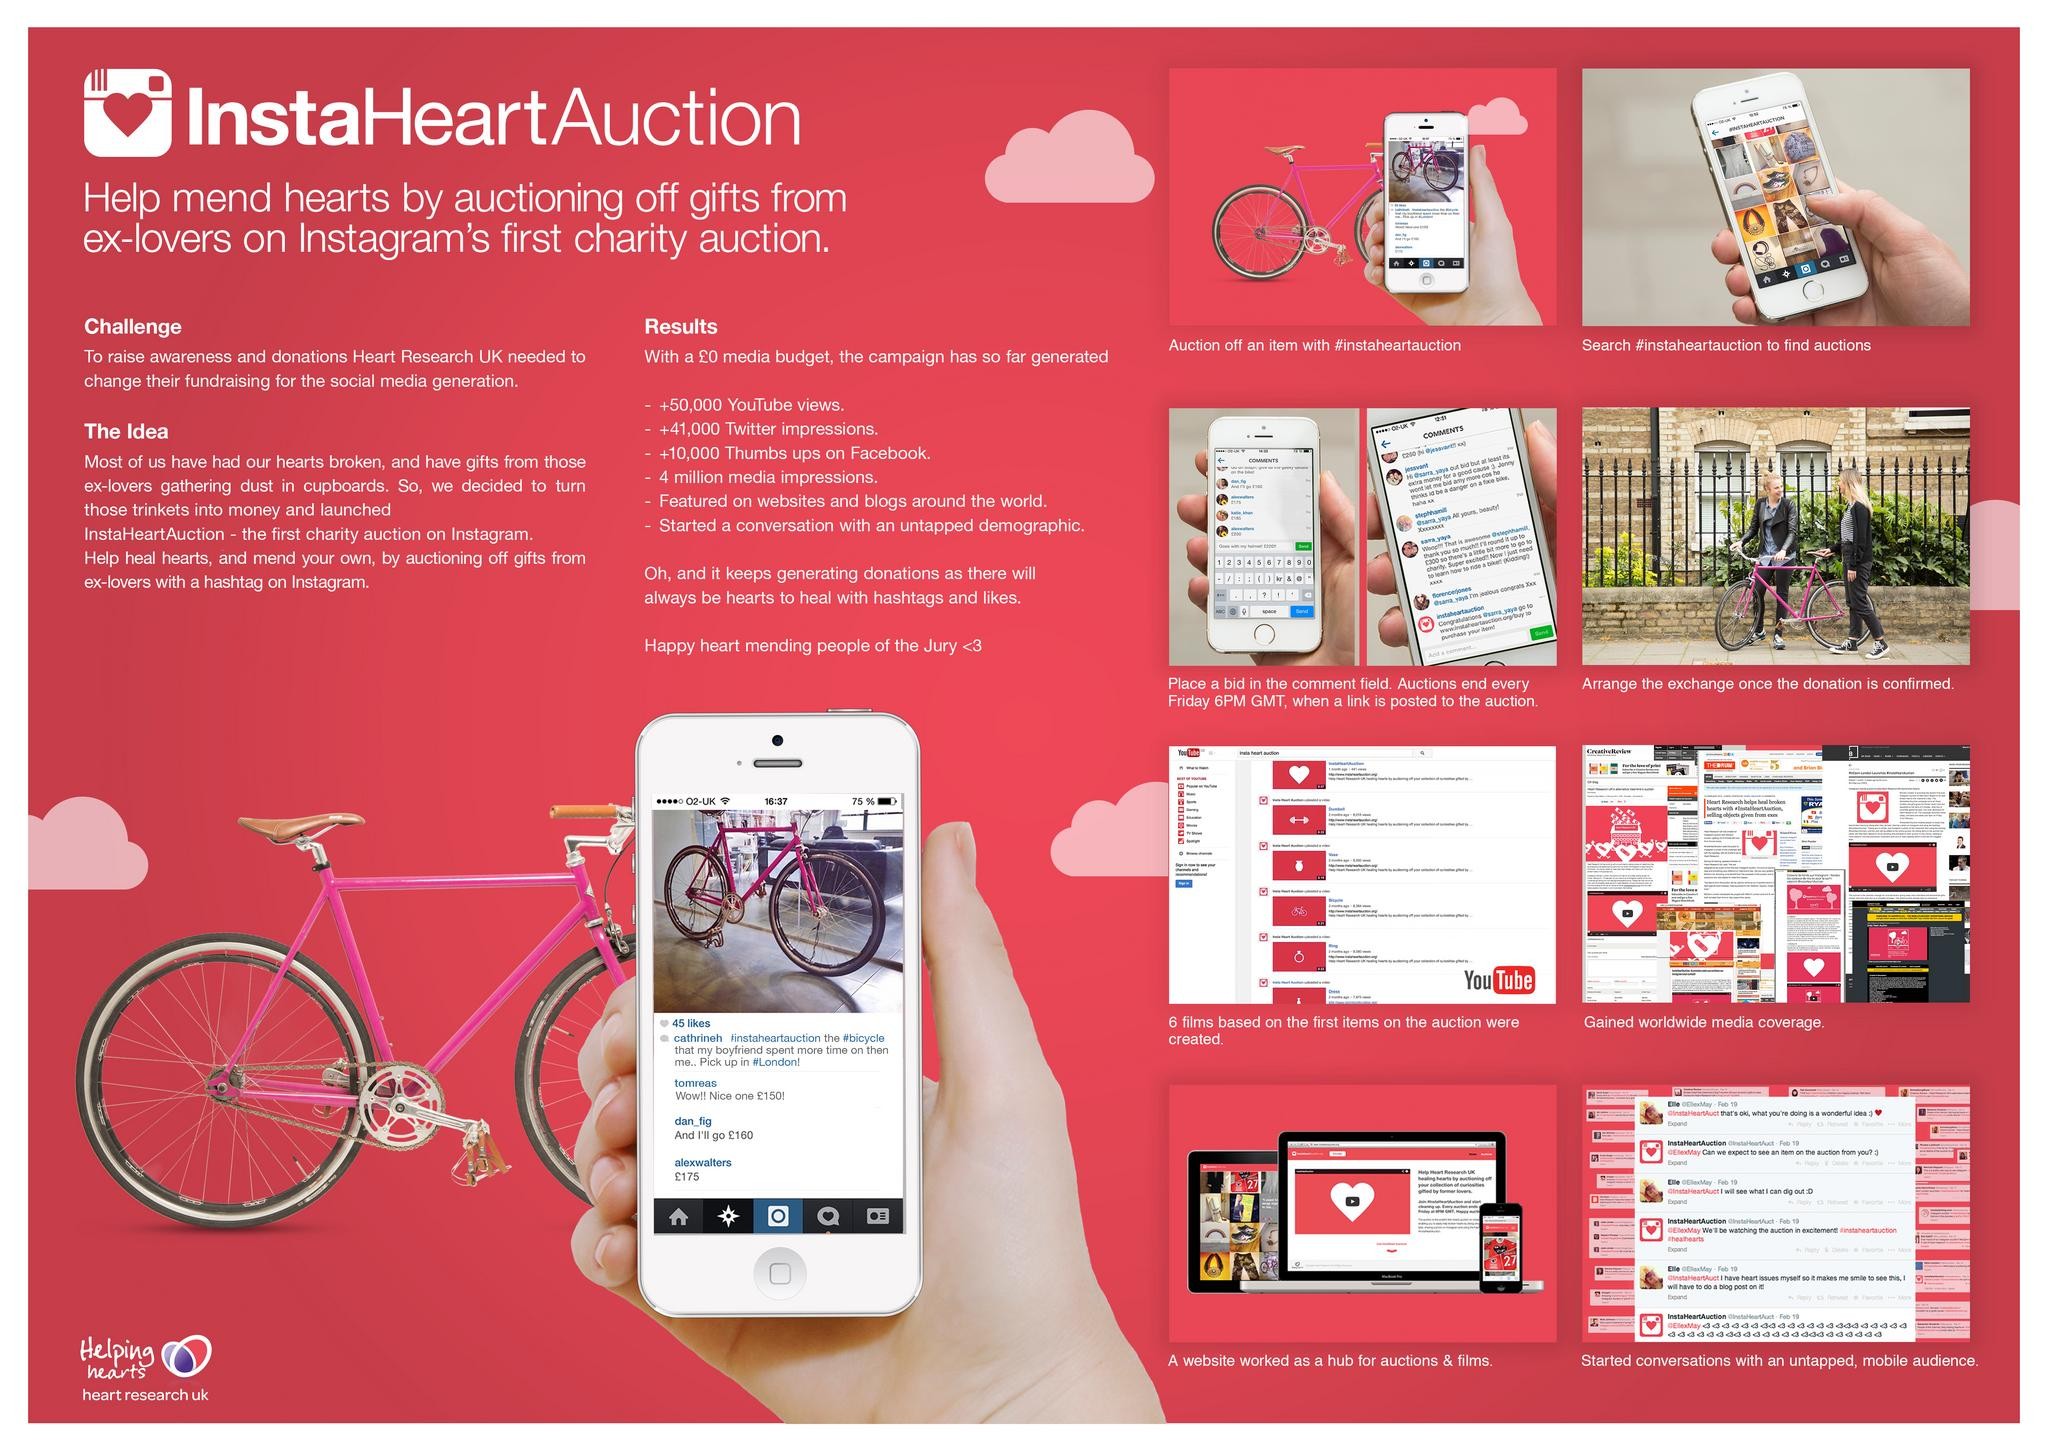 INSTAHEART AUCTION